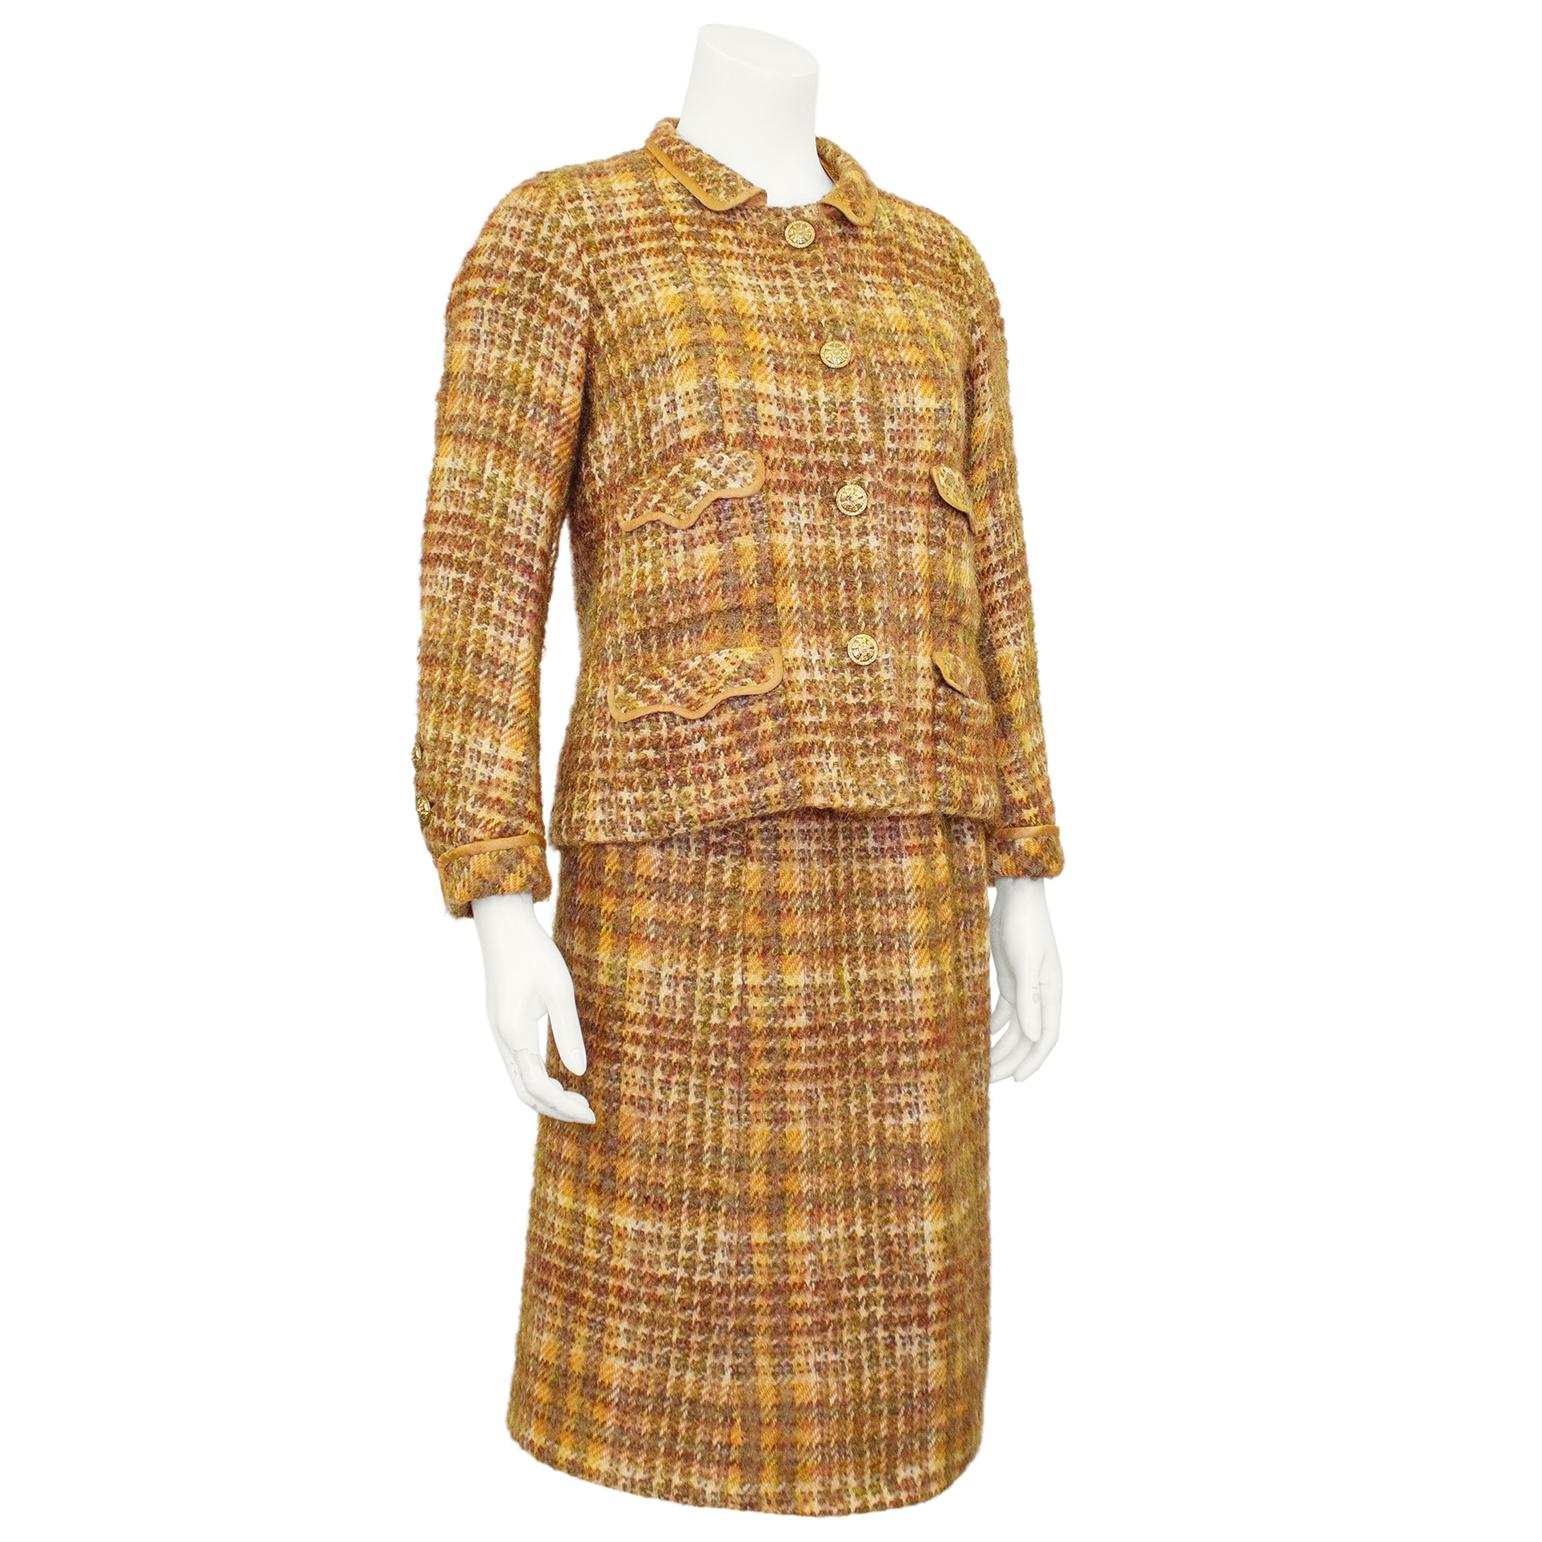 Chanel Haute Couture jacket and dress ensemble from the 1960s. A beautiful combination of tweed in shades of copper and copper coloured silk. The jacket features a small Peter Pan collar, stunning gold tone metal buttons with flower details, four